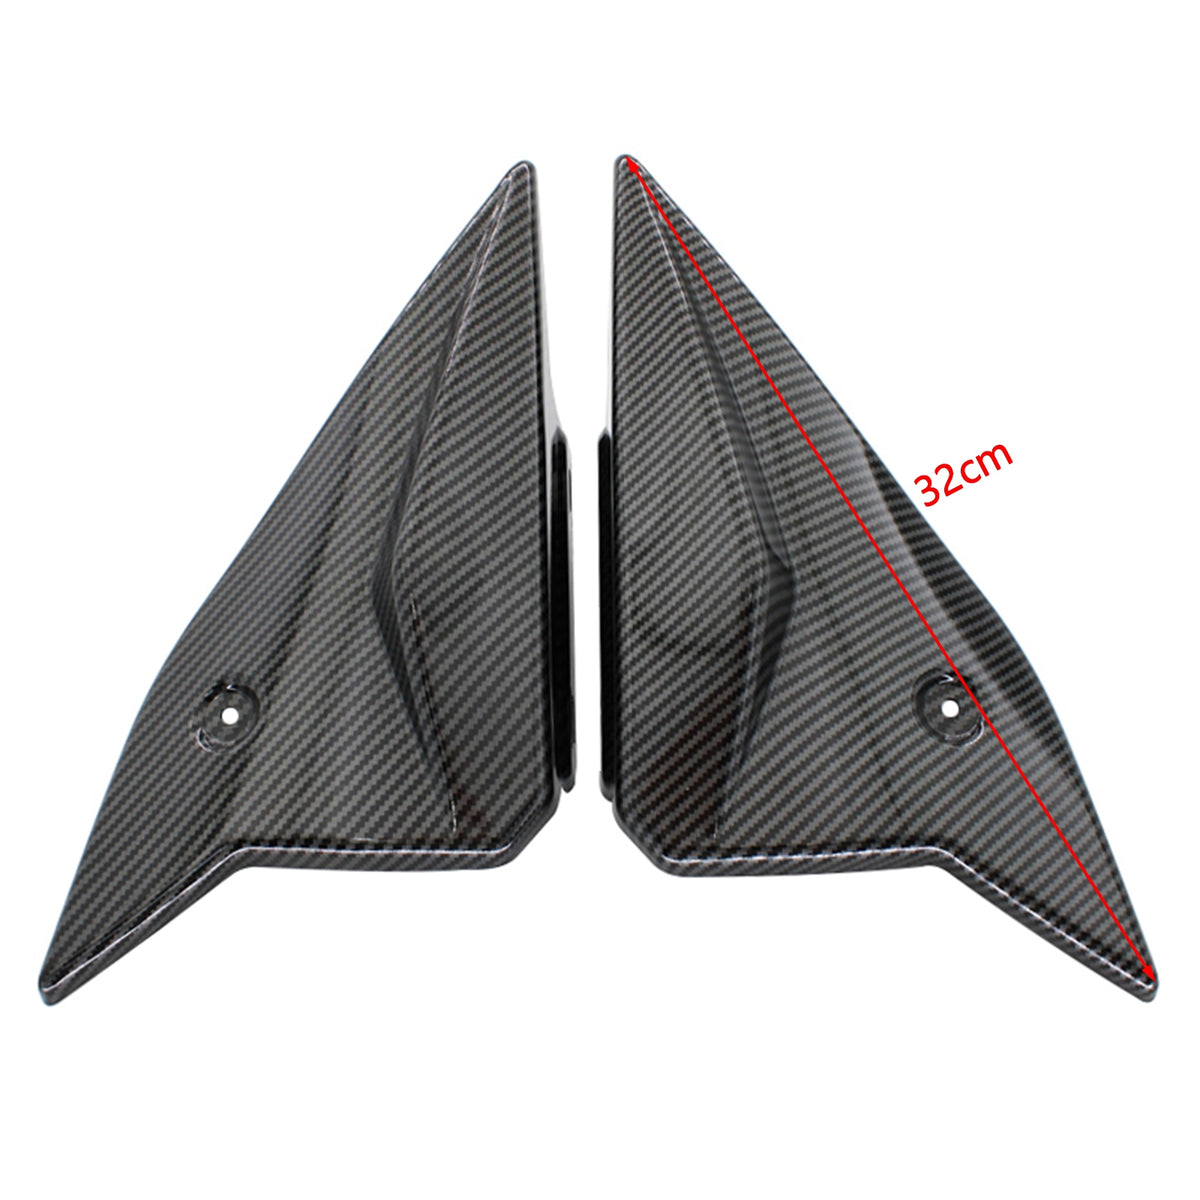 ABS Plastic Side Panels Cover Fairing Cowl For Yamaha MT-09 FZ09 2014-2022 Carbon Generic